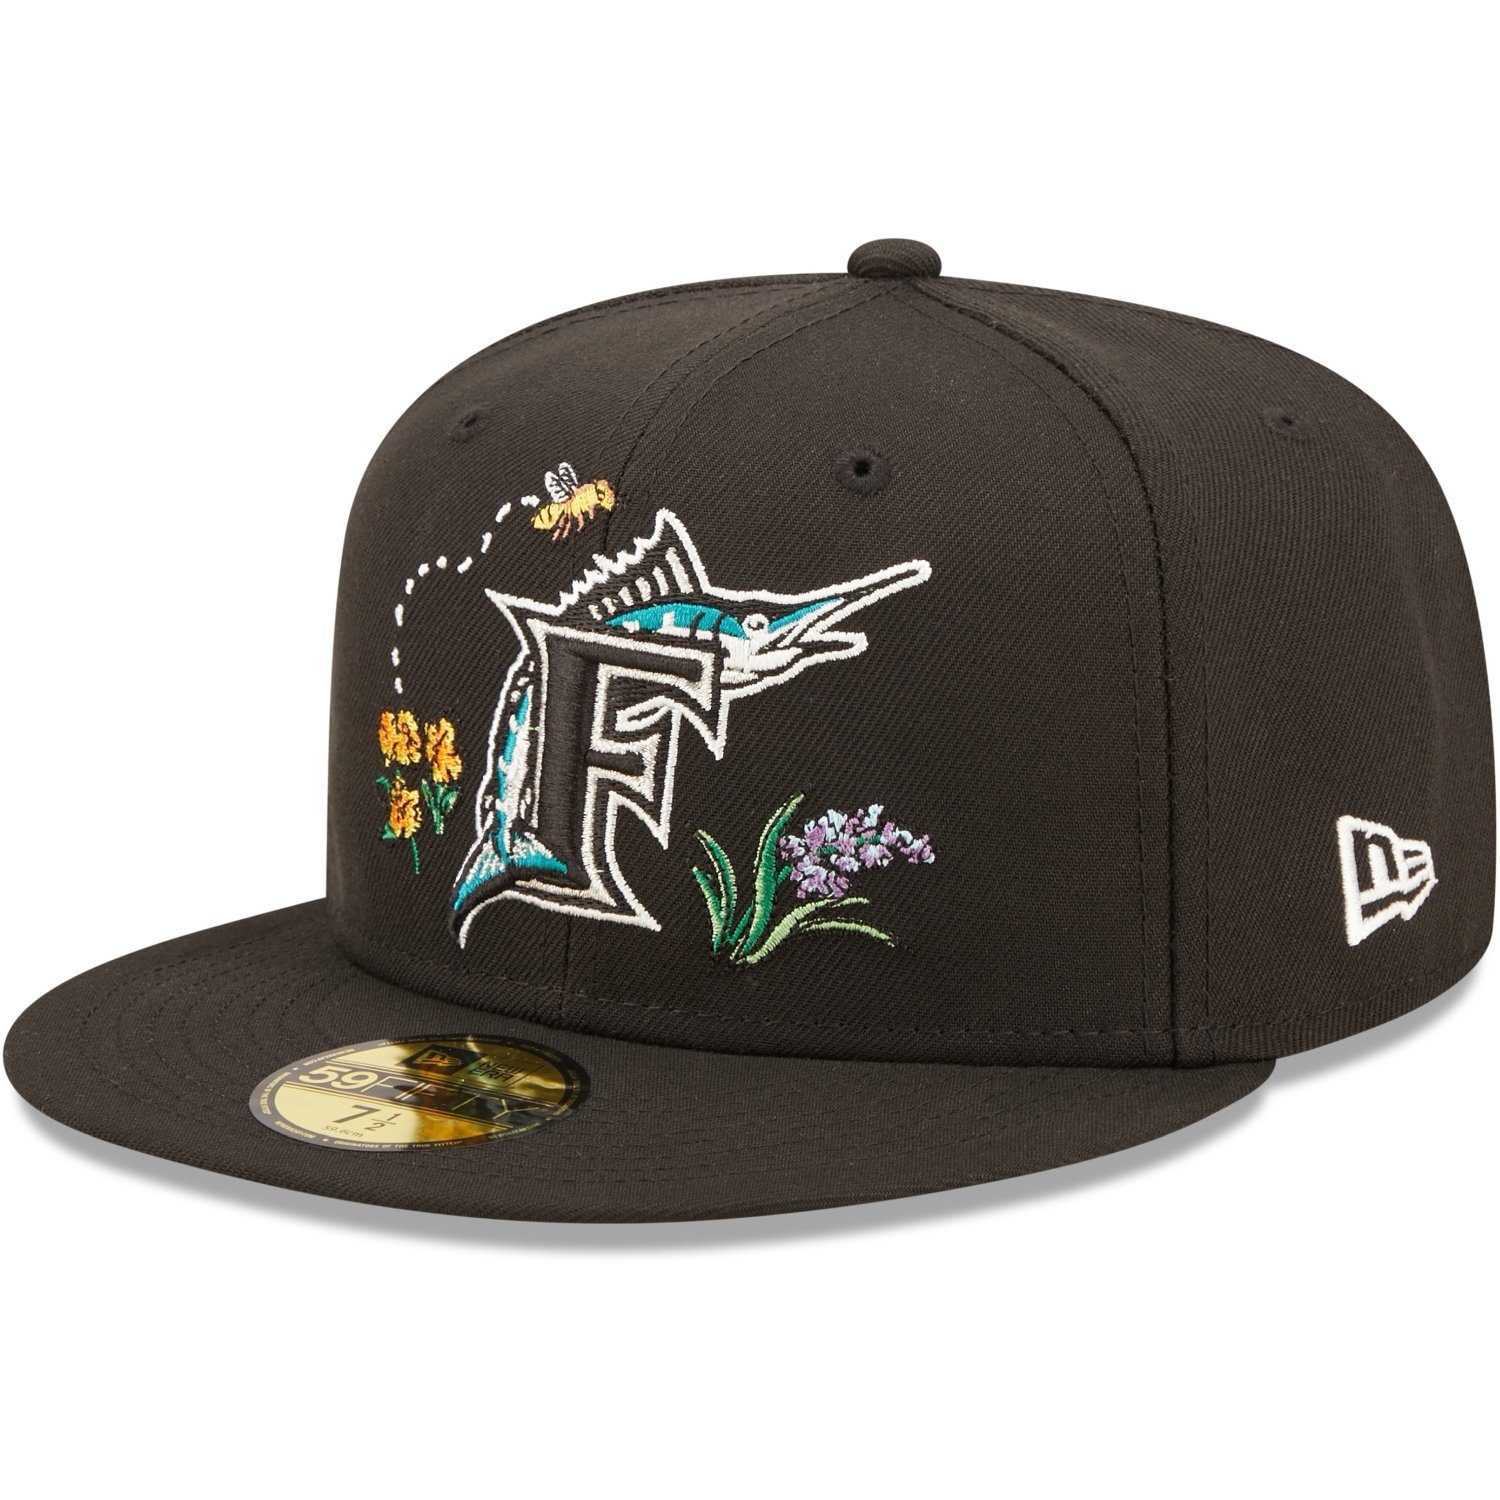 New Era Fitted Cap 59Fifty WATER FLORAL Miami Marlins